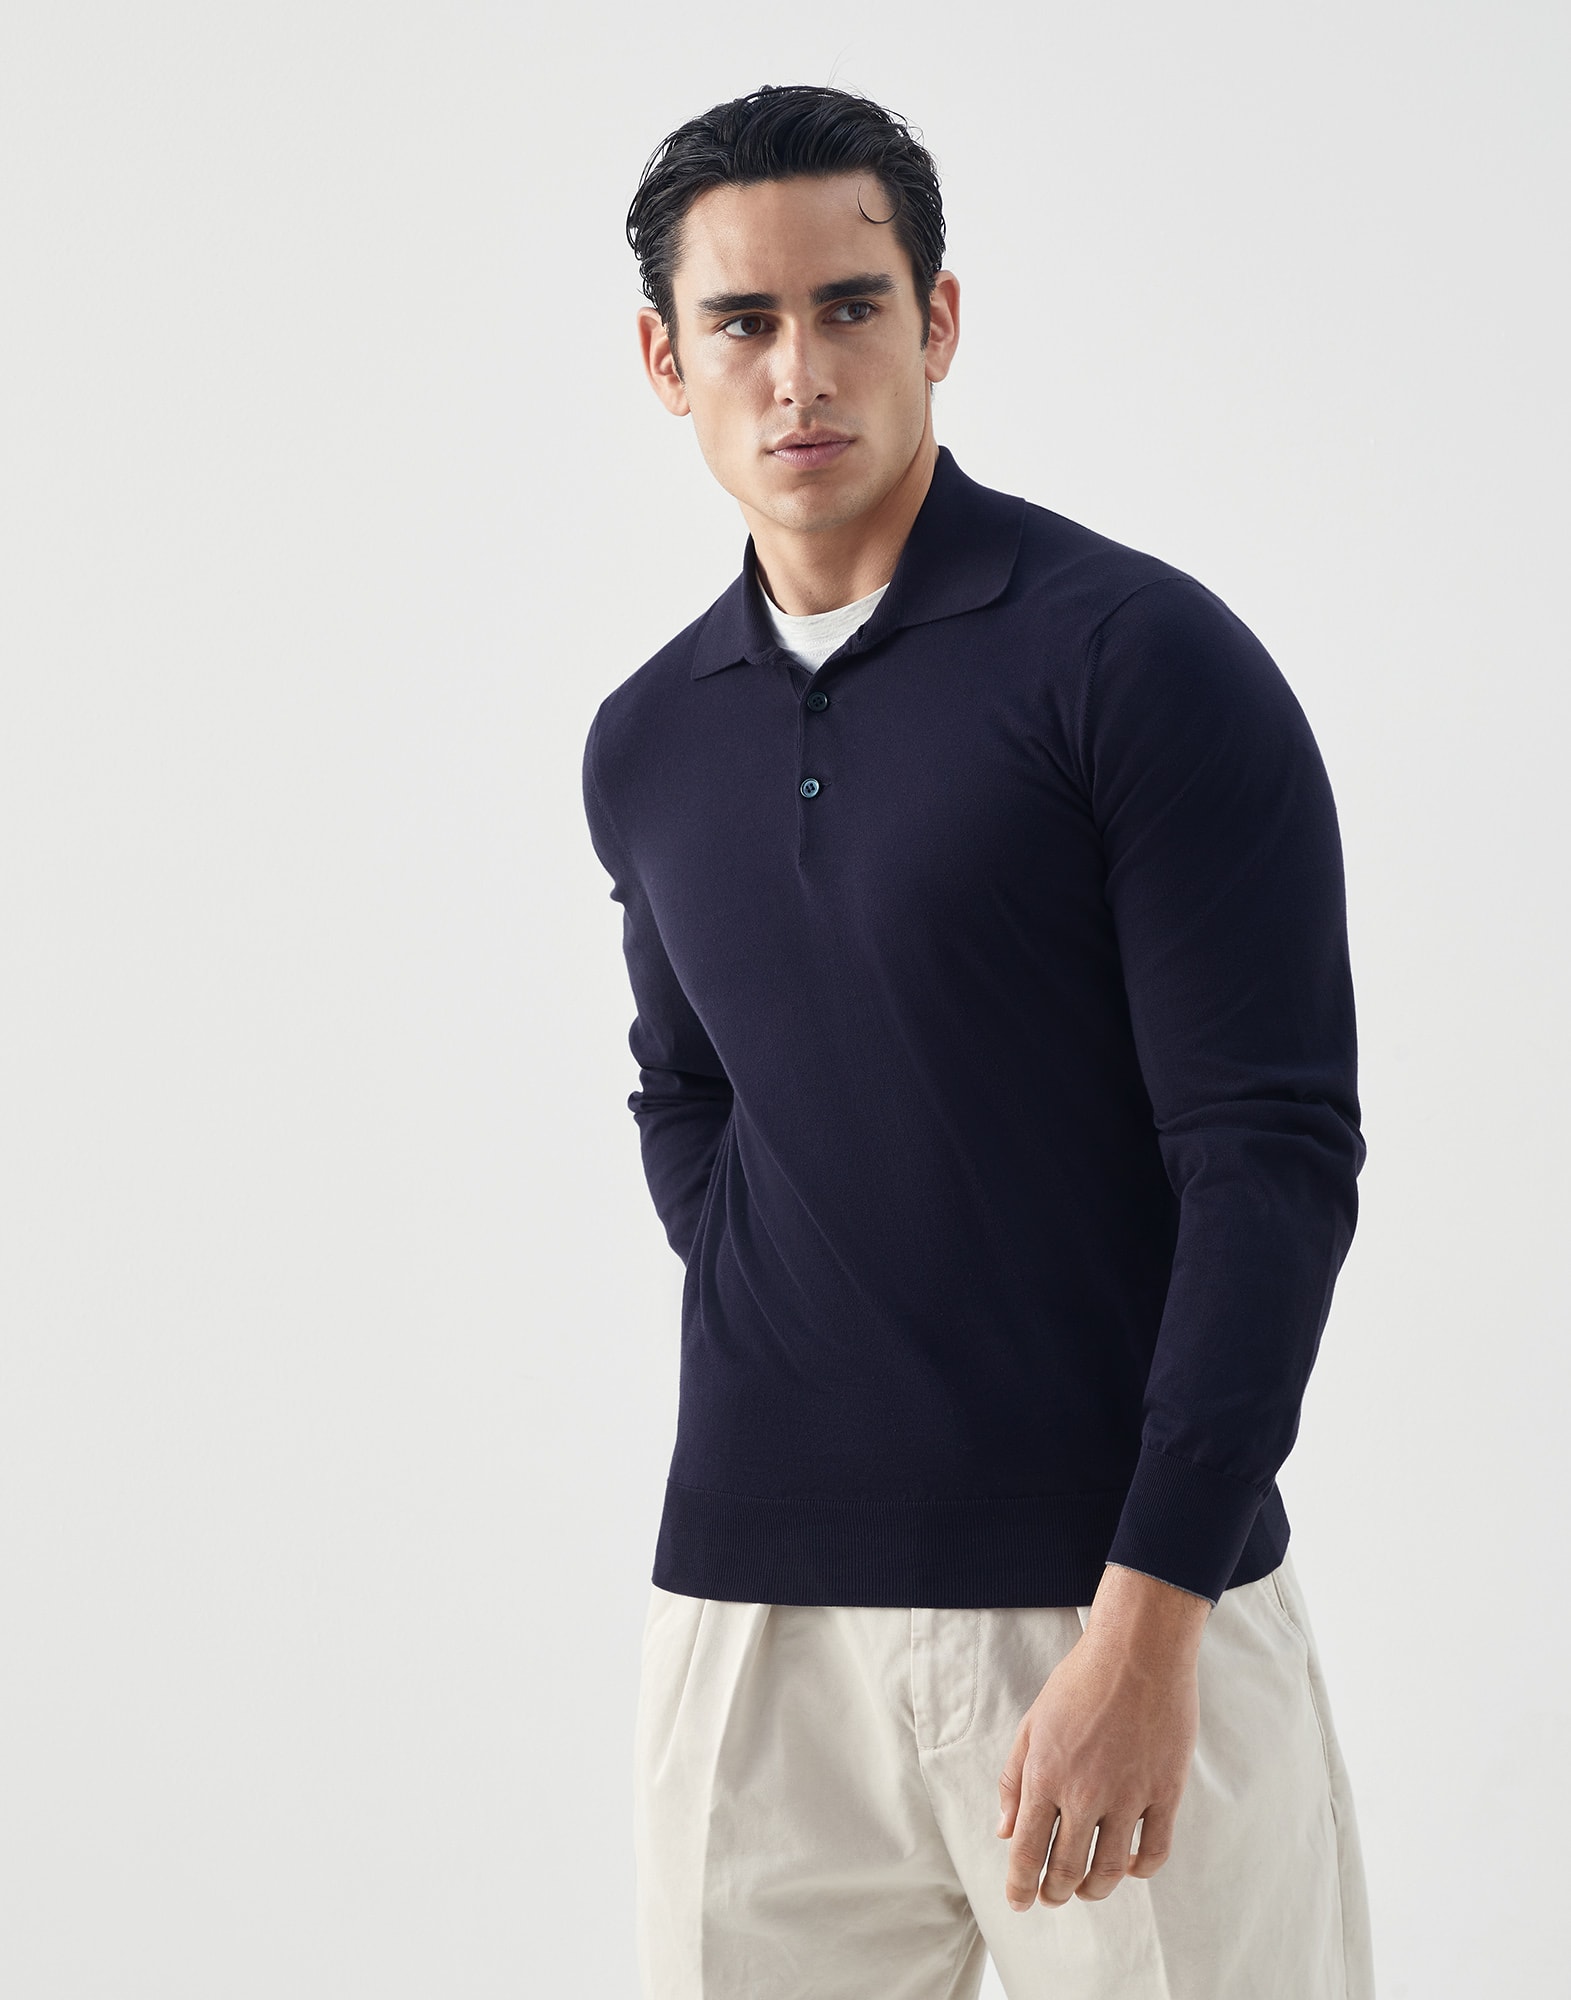 Pull style polo